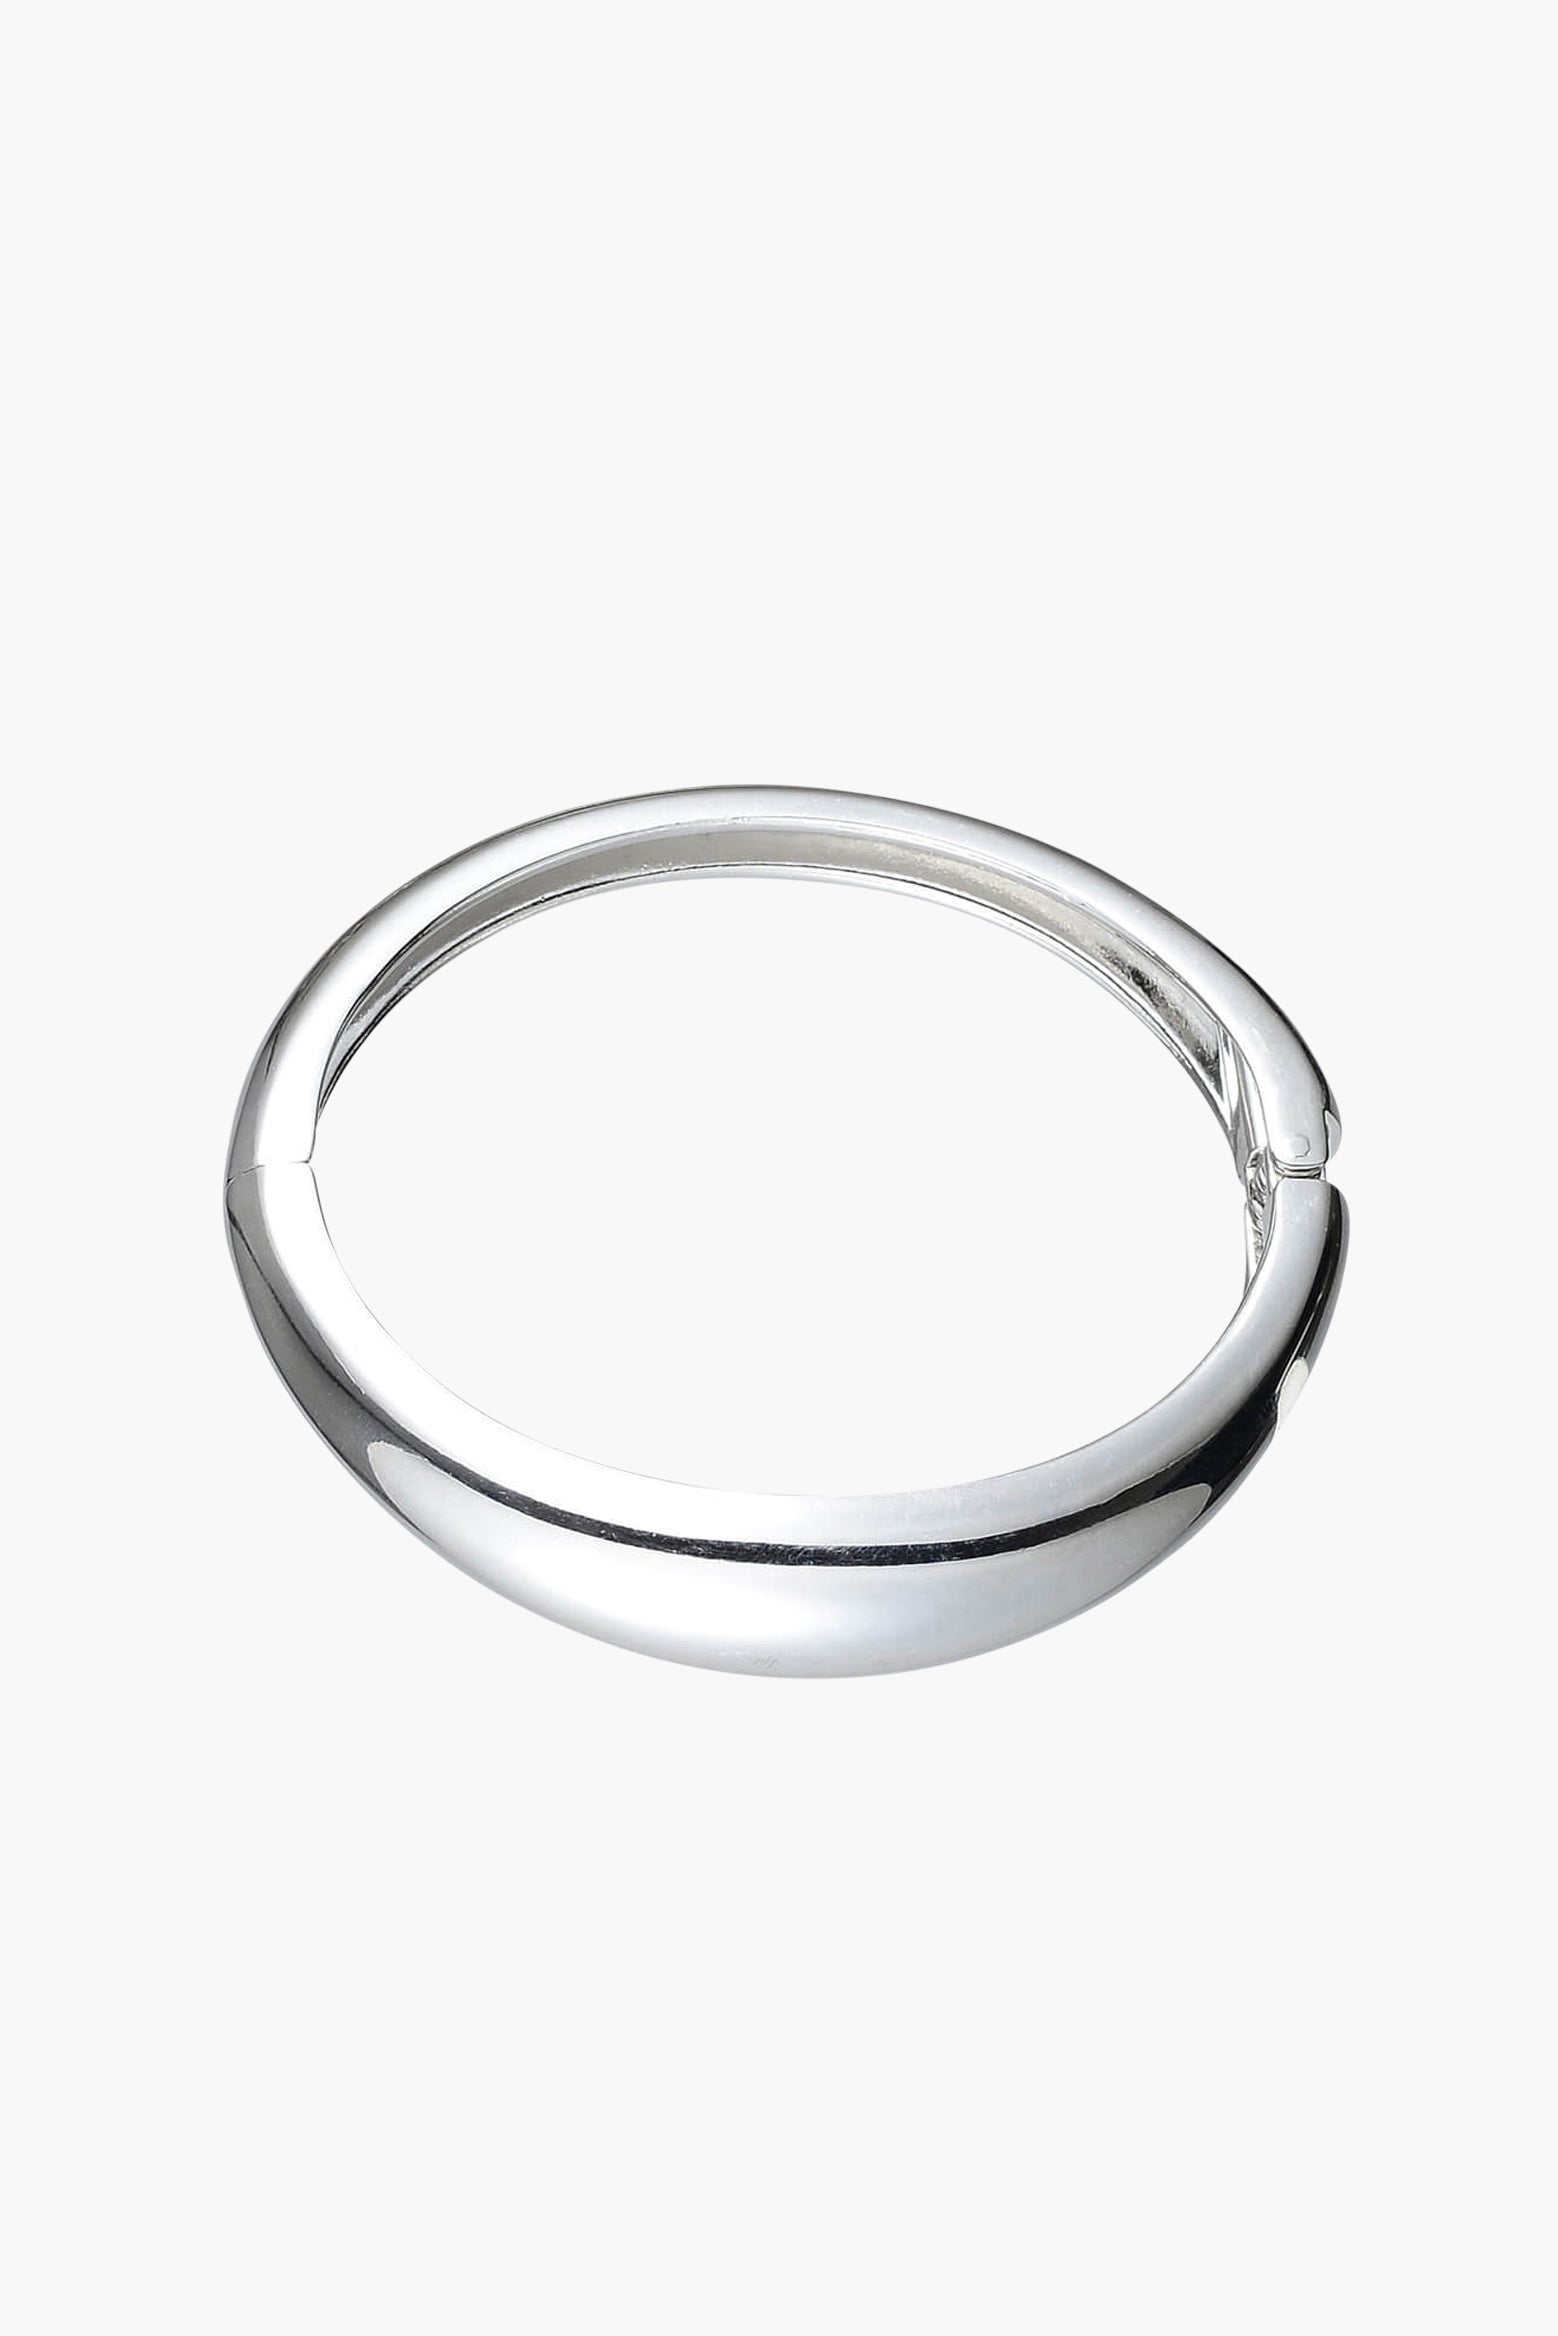 Anna Rossi Smooth Operator Bangle in Gunmetal available at TNT The New Trend Australia.